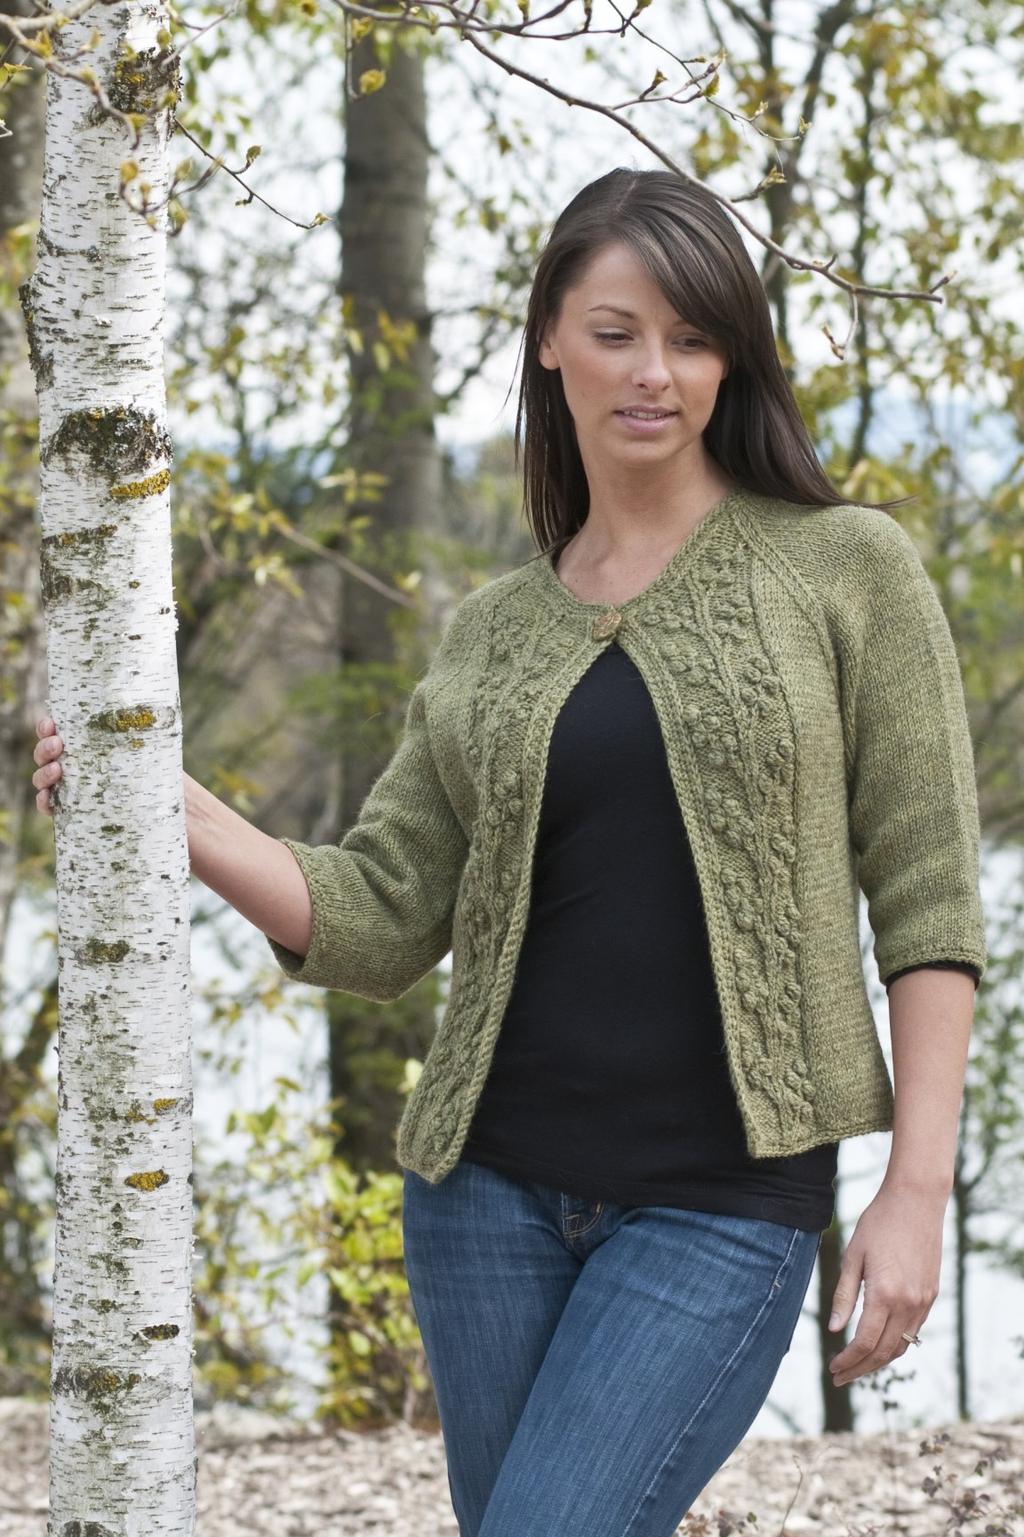 Alpaca Lana D Oro Bobble Vine Jacket Designed By Edie Eckman Skill Level: Intermediate Women's Sizes: S (M, L, XL, 2X)" Finished Measurements: Finished Chest: 36 (40, 44, 48, 52)" Finished Length: 21